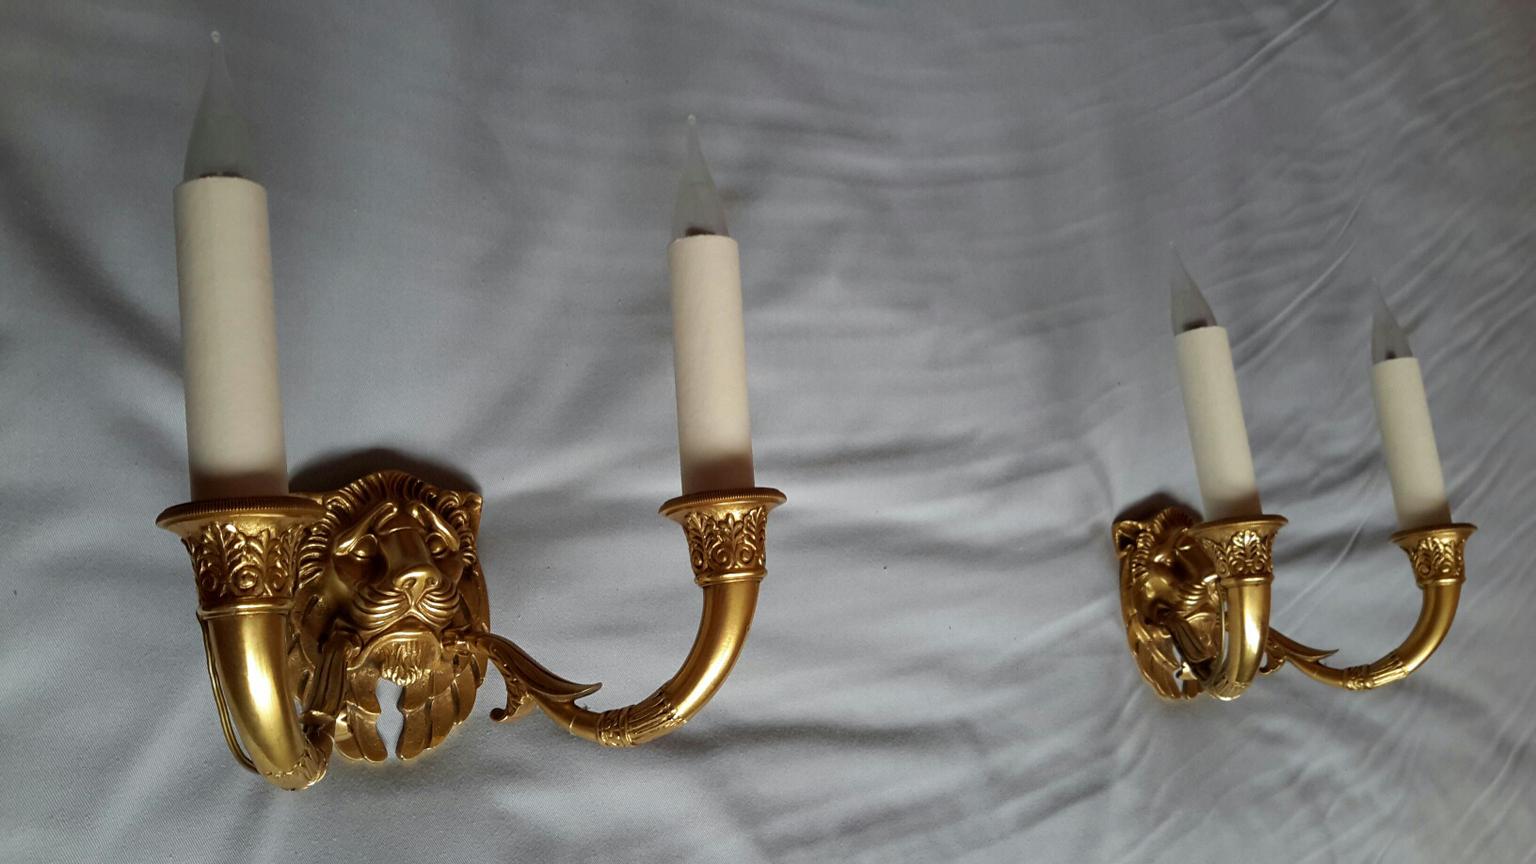 Rare and beautiful pair of double sconces French Empire style from beginning of the 20th century in gilded bronze figuring lion's head.
The sconces are in magnificent condition.
Electrical parts have been renewed with hard cardboard sleeves in